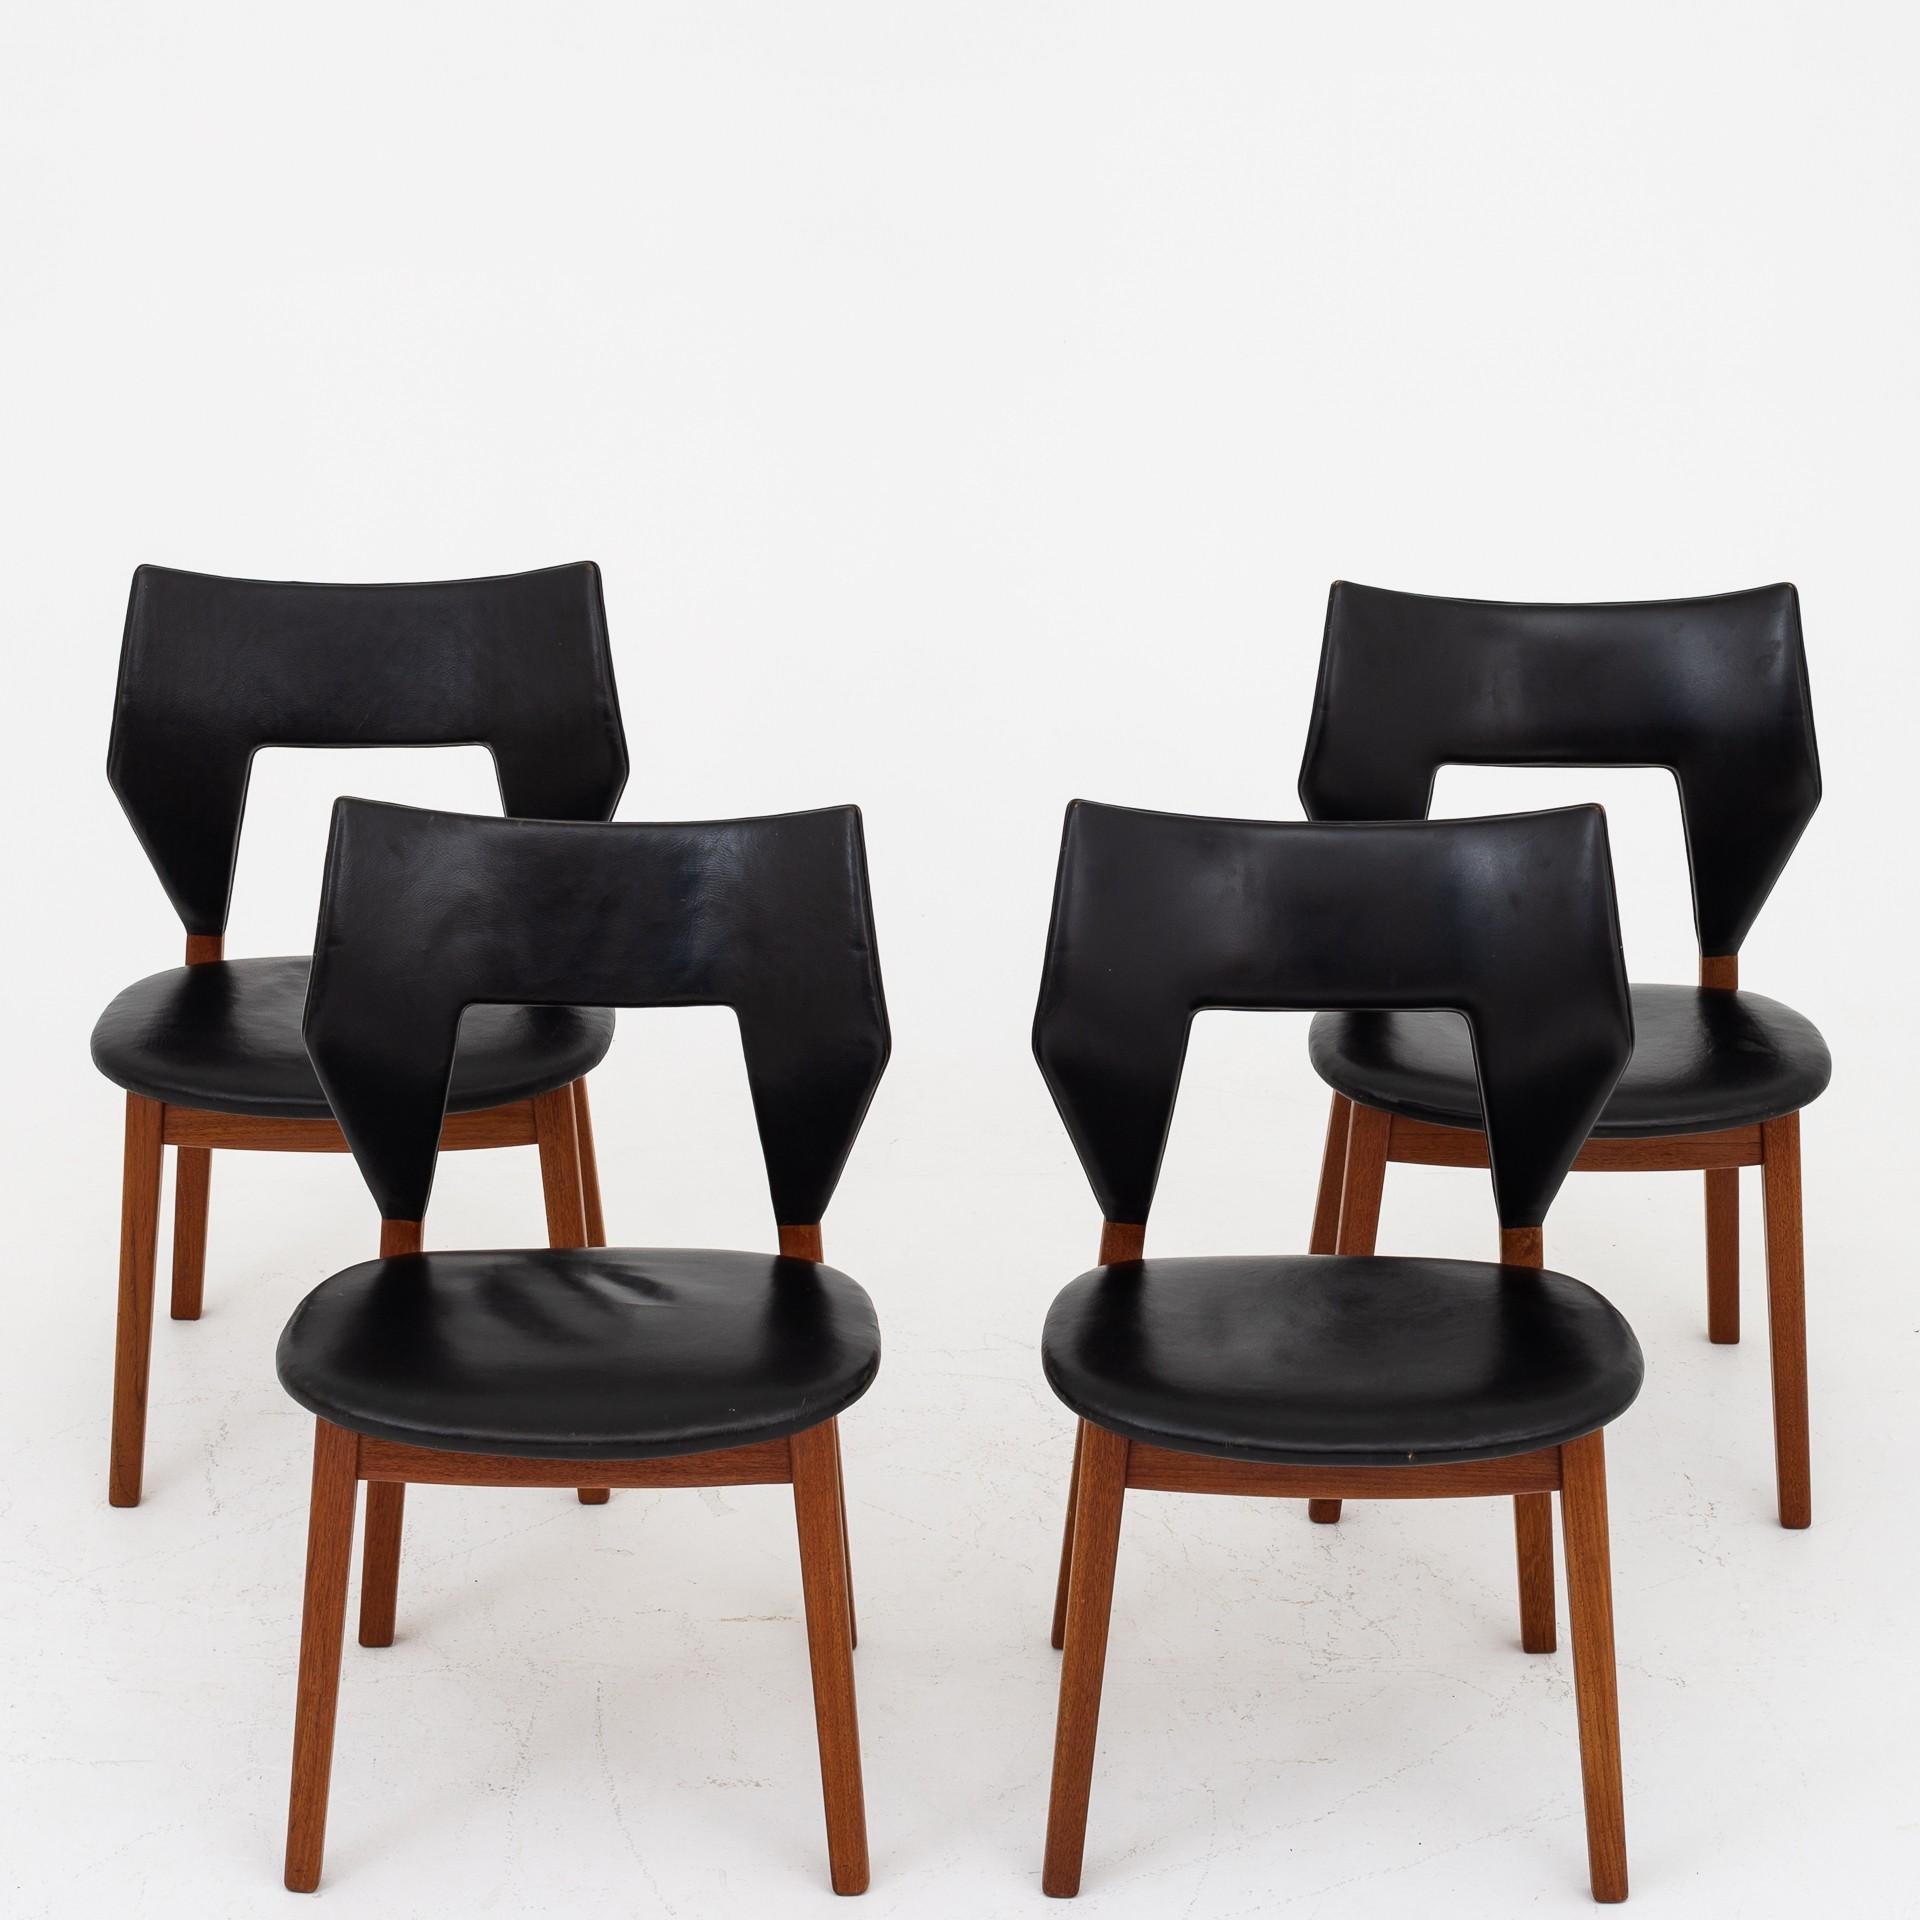 Set of 4 dining chairs with frame of teak and seat and back in black, patinated leather. Designed in 1960. Maker Thorald Madsen.